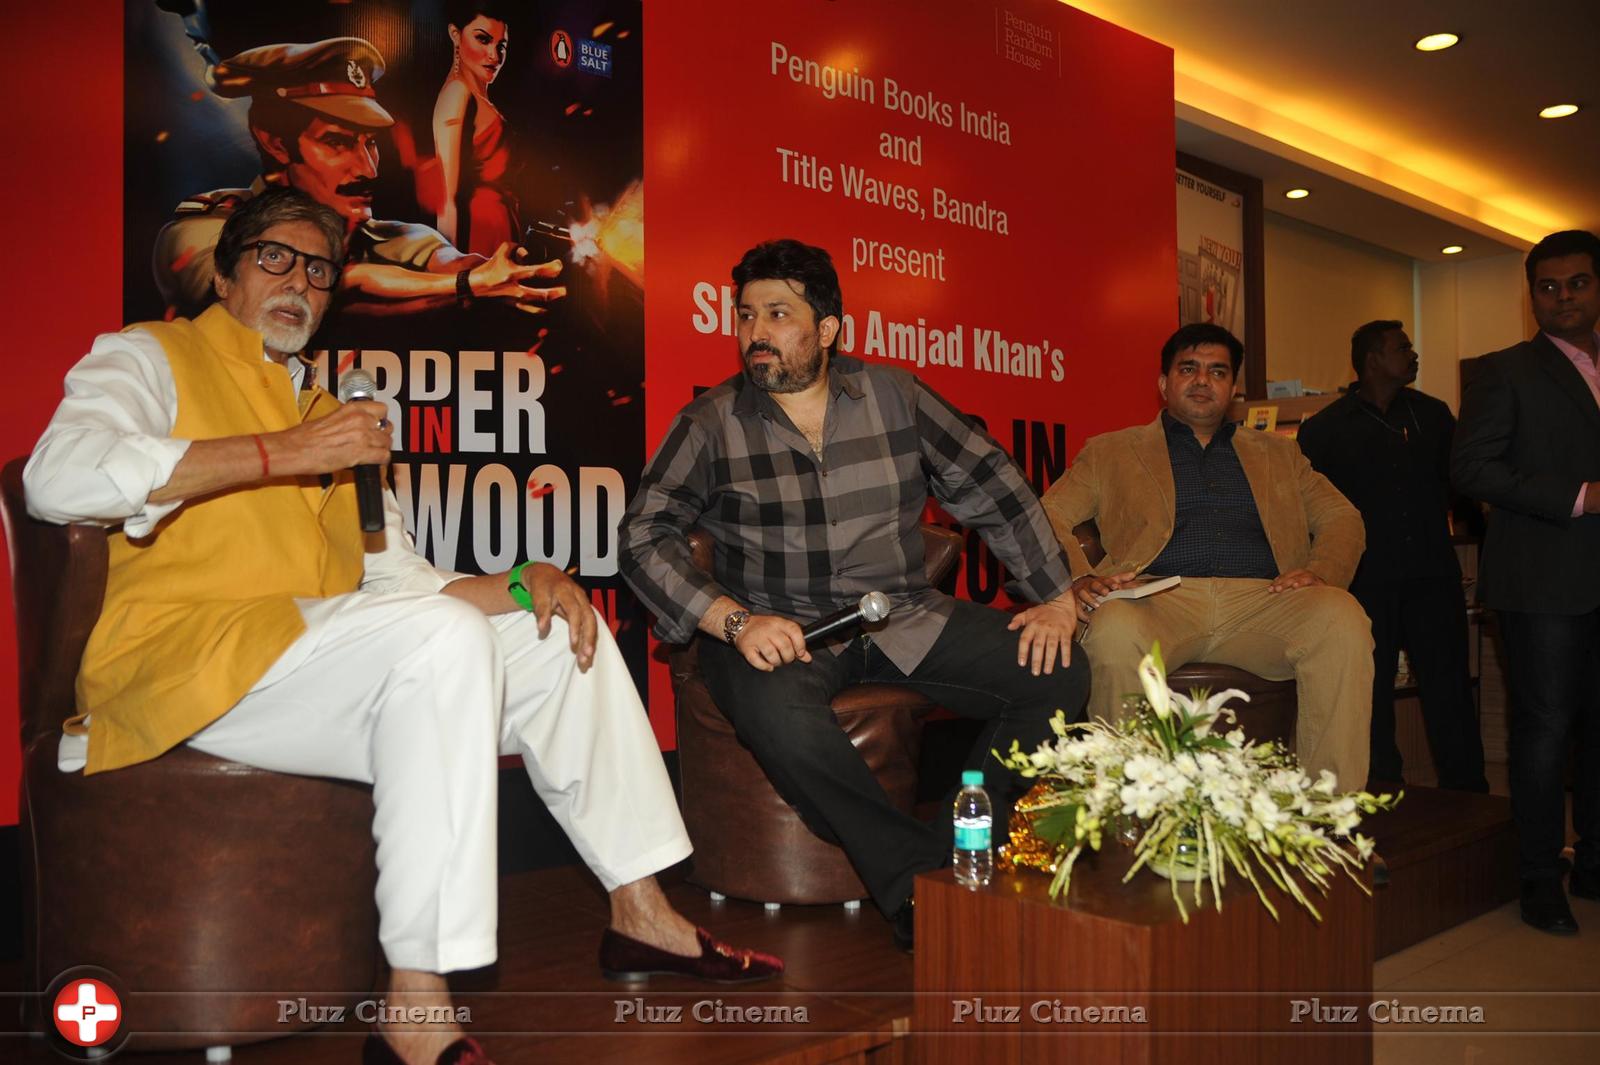 Amitabh Bachchan launches Shadab Amjad Khan's book Murder in Bollywood Photos | Picture 1062734